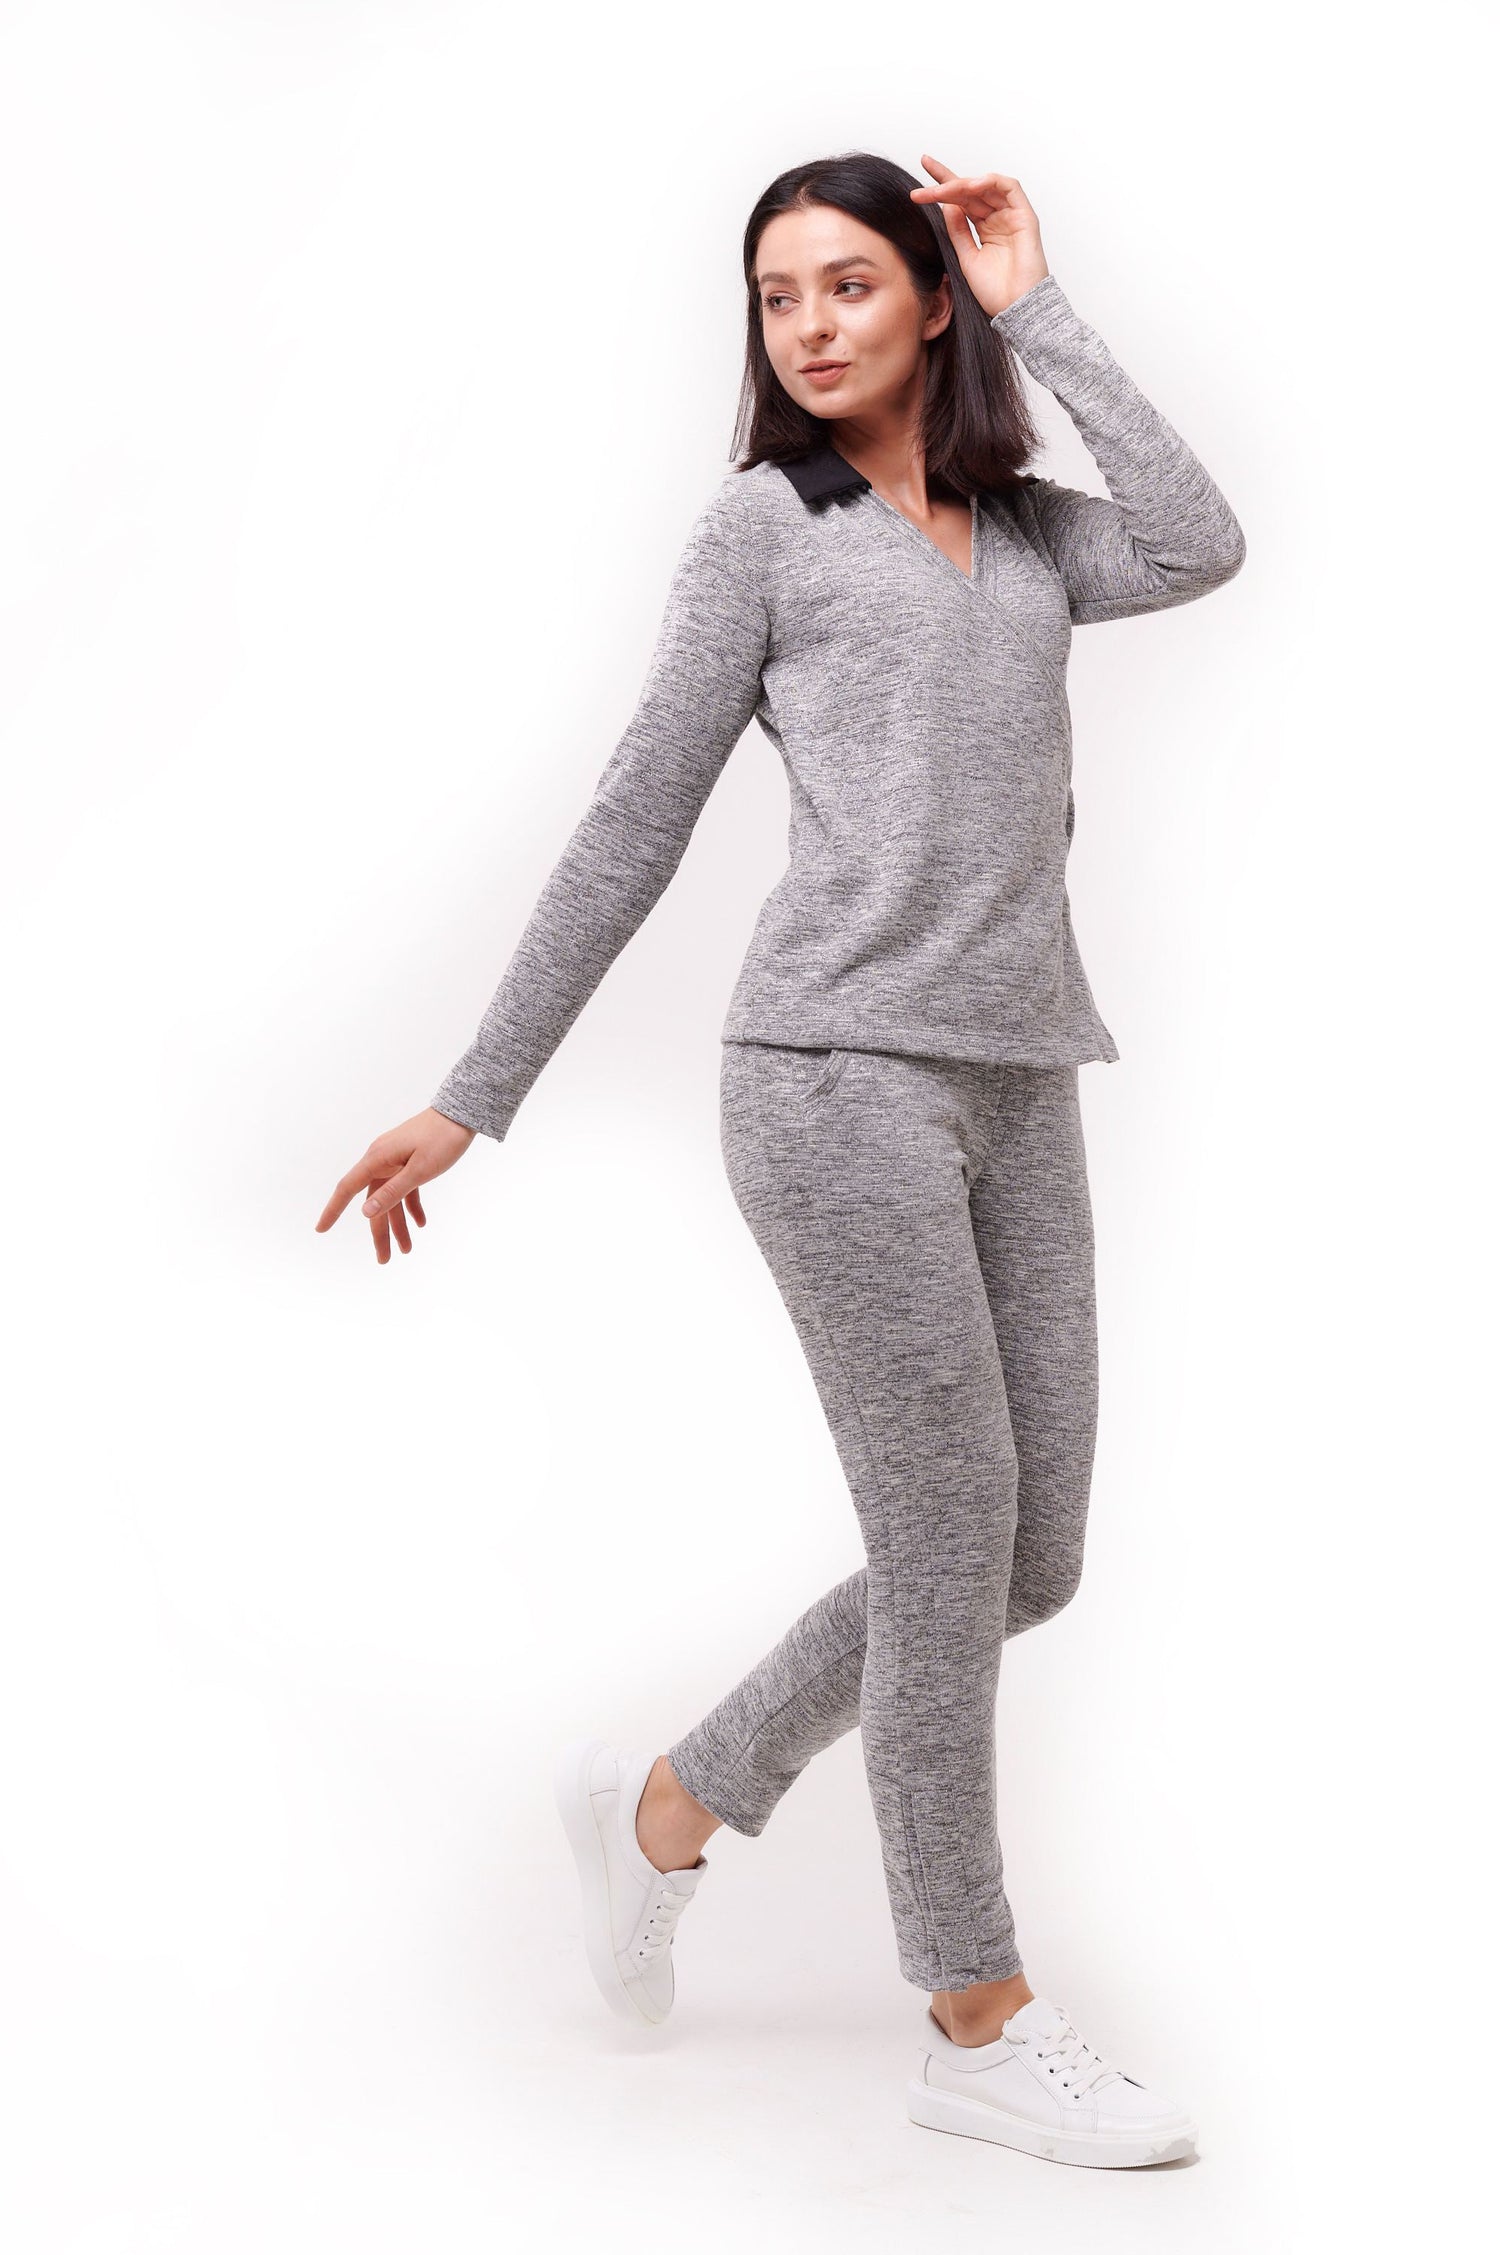 Woman posing wearing grey full length slim pants with ankle snap closures and matching top.